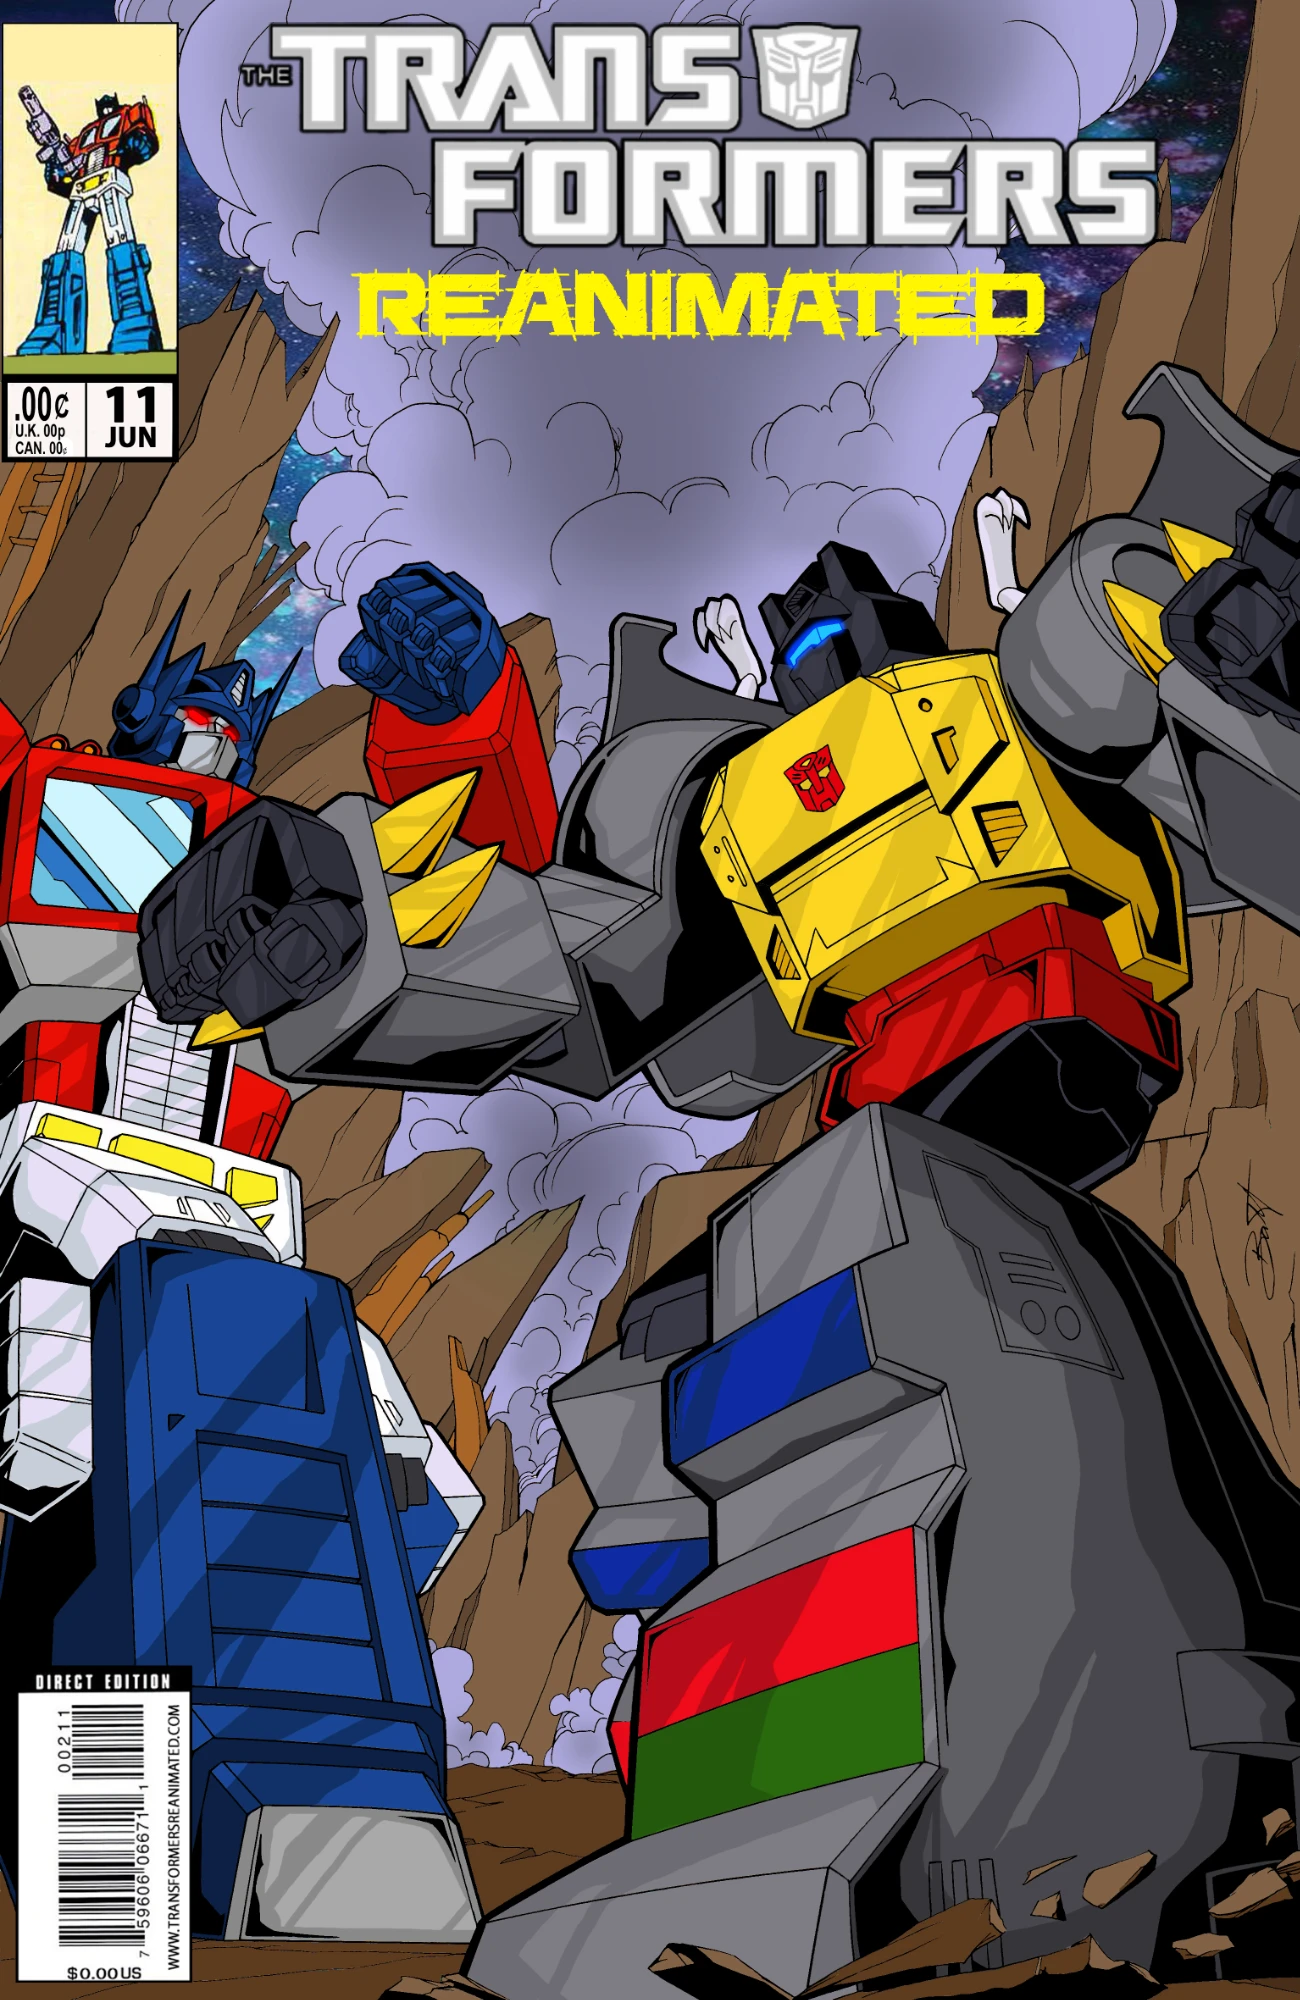 Transformers comic cover with Optimus Prime and Grimlock fighting